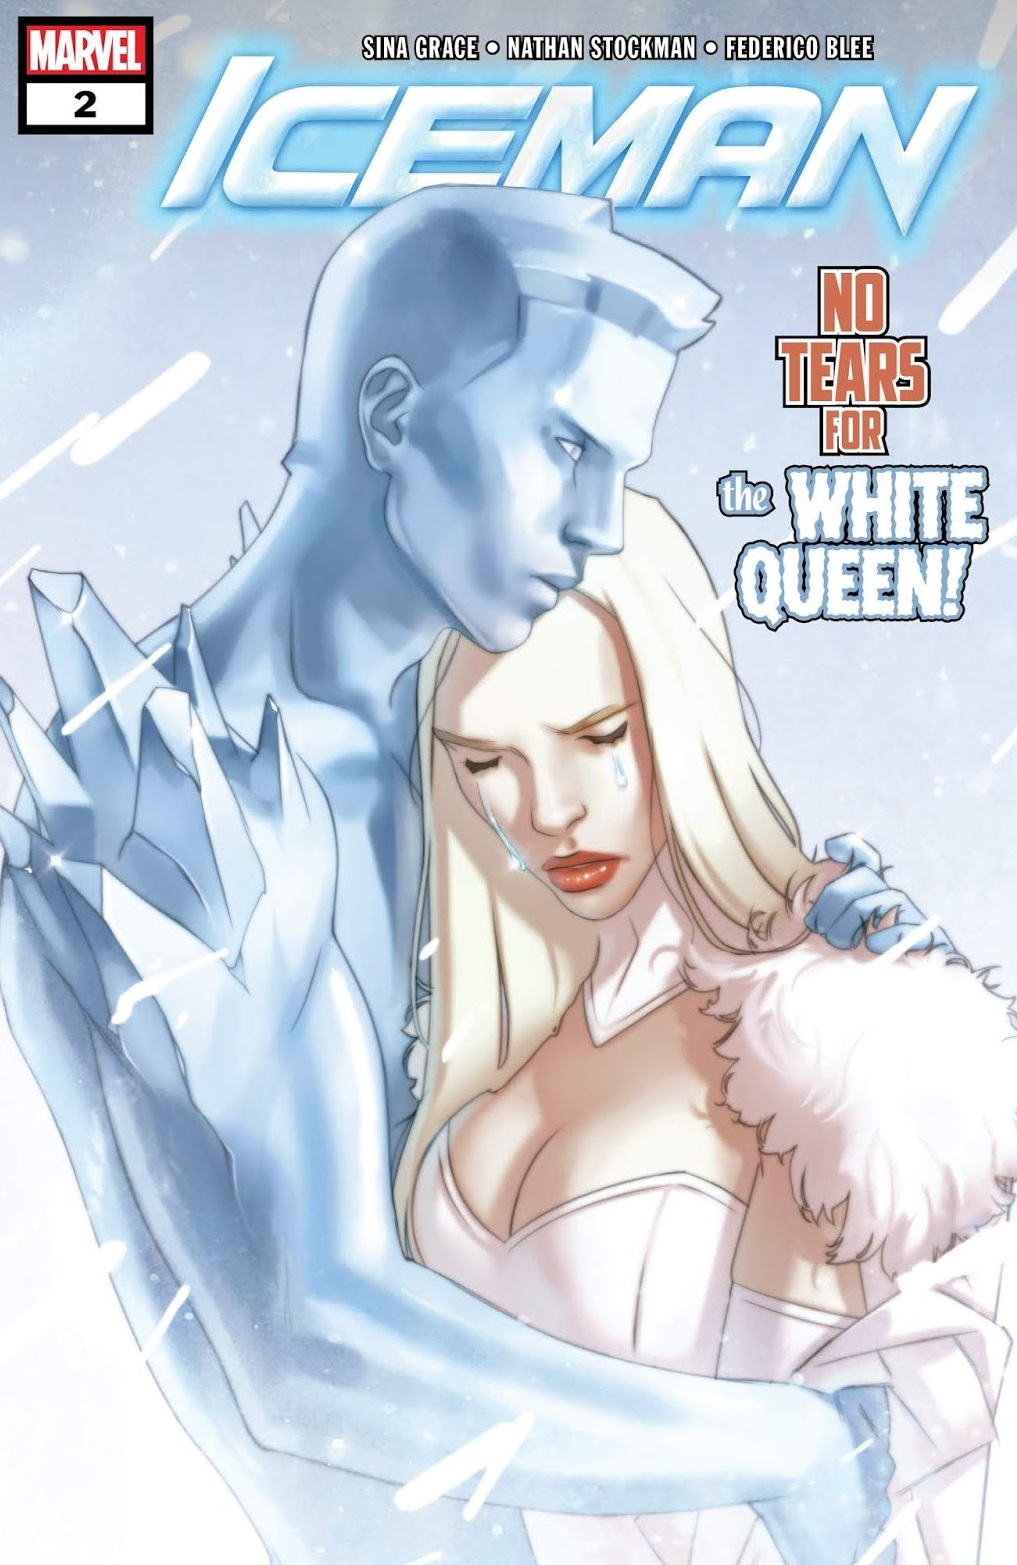 Iceman Issue 2 Review 2018